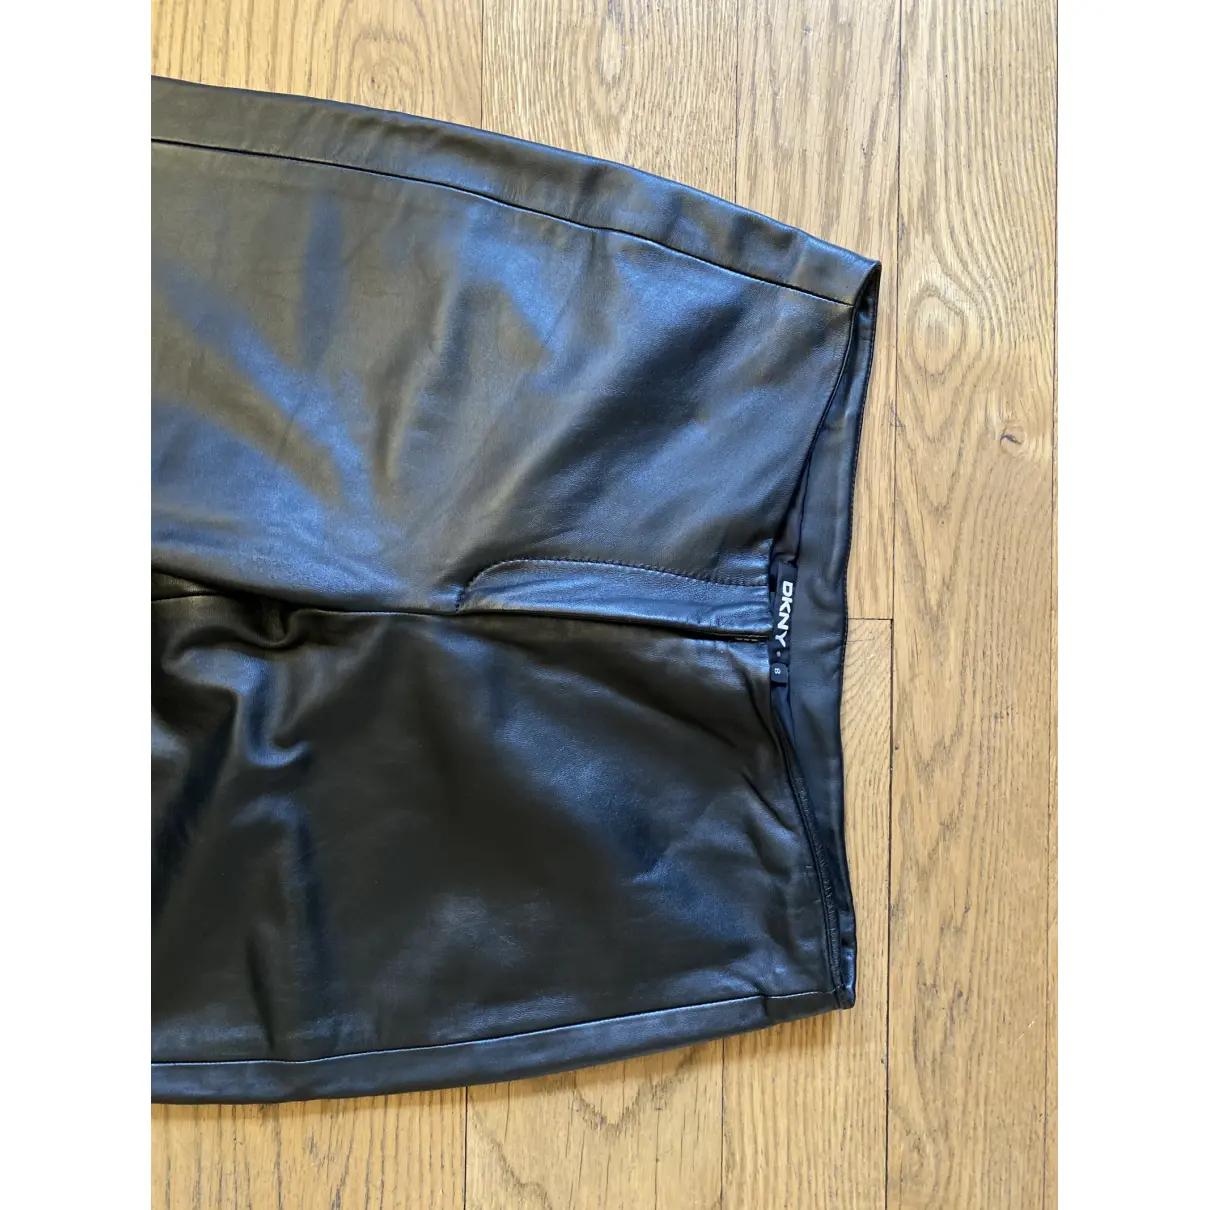 Buy Dkny Leather straight pants online - Vintage